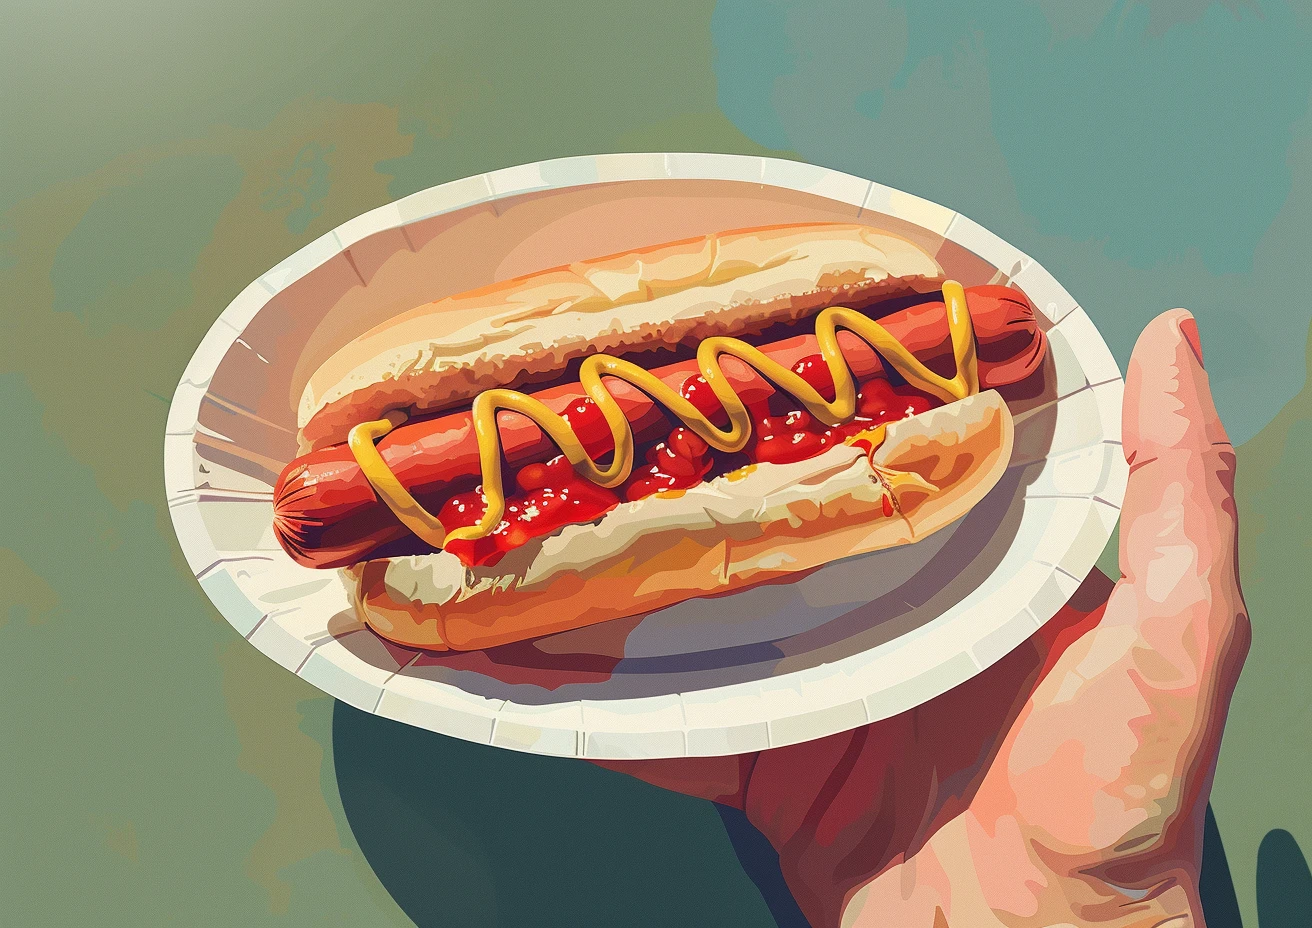 It's a hot dog, see?